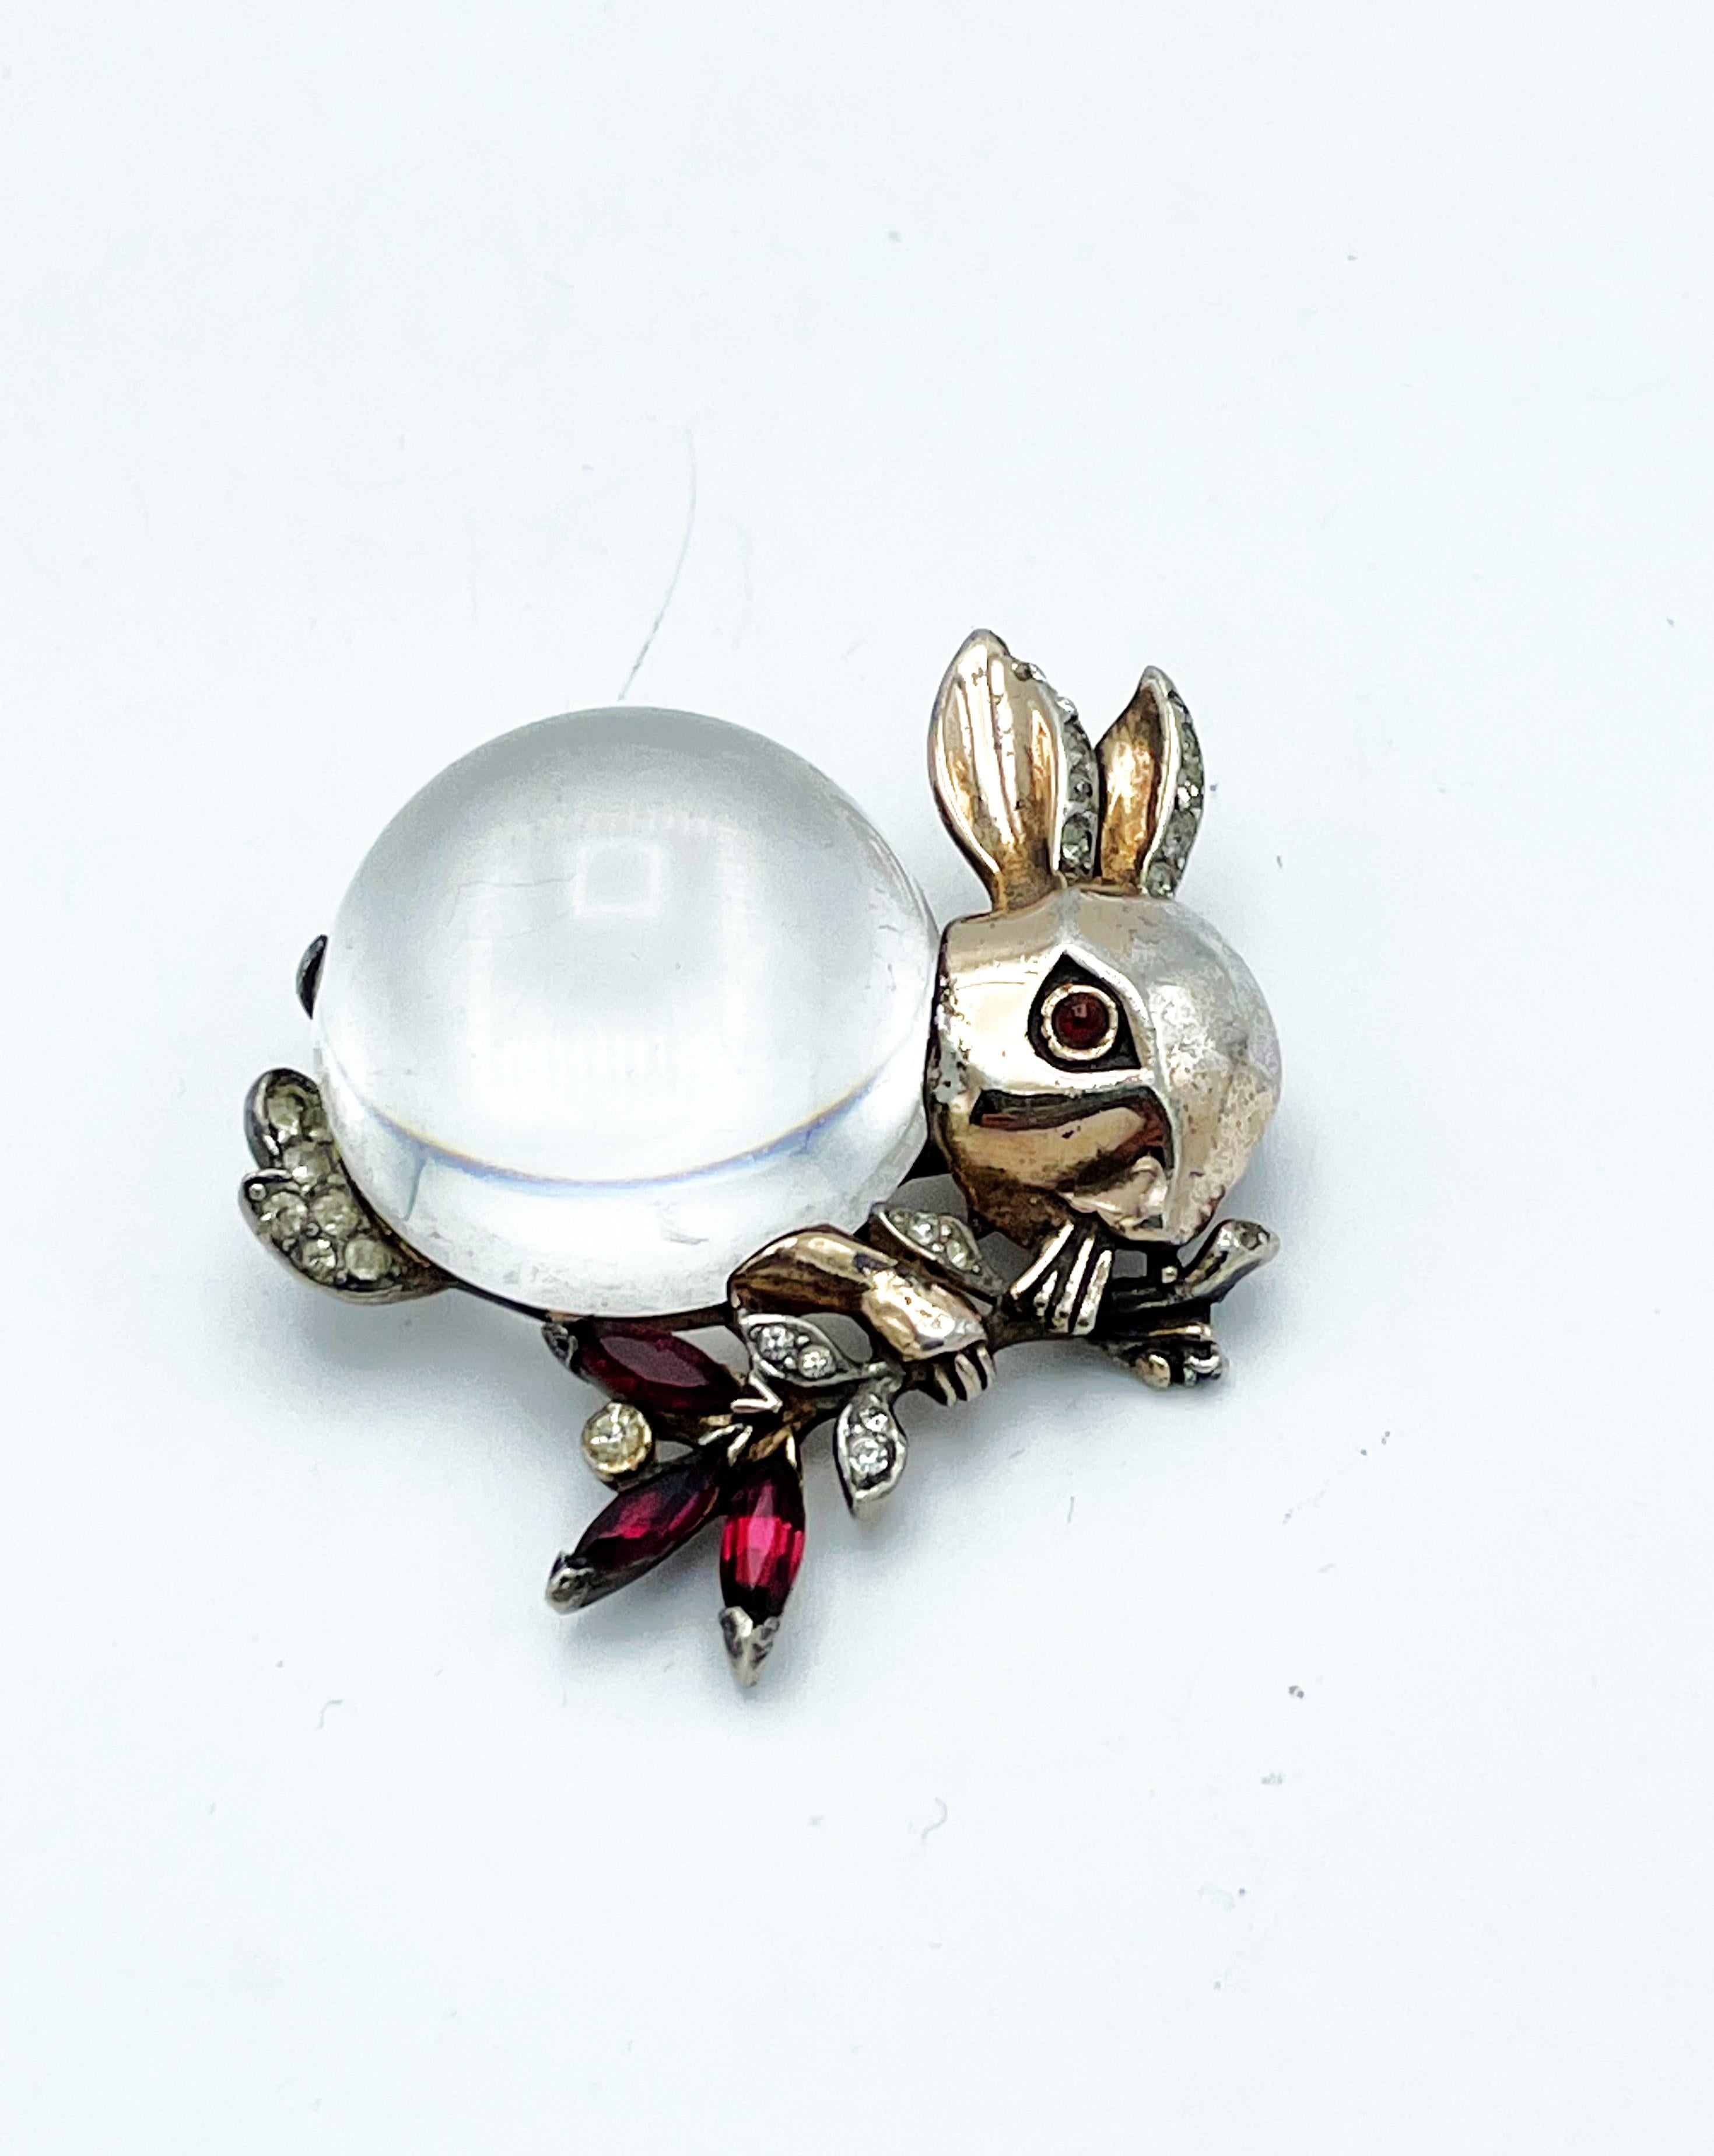 Jelly Belly Rabbit brooch by Trifari USA made by Sterling silber gold plated. 
In the 1940s, no rhinestones could be imported into the USA from Europe.
Necessity is the mother of invention and a whole series of animals with a body made of thick